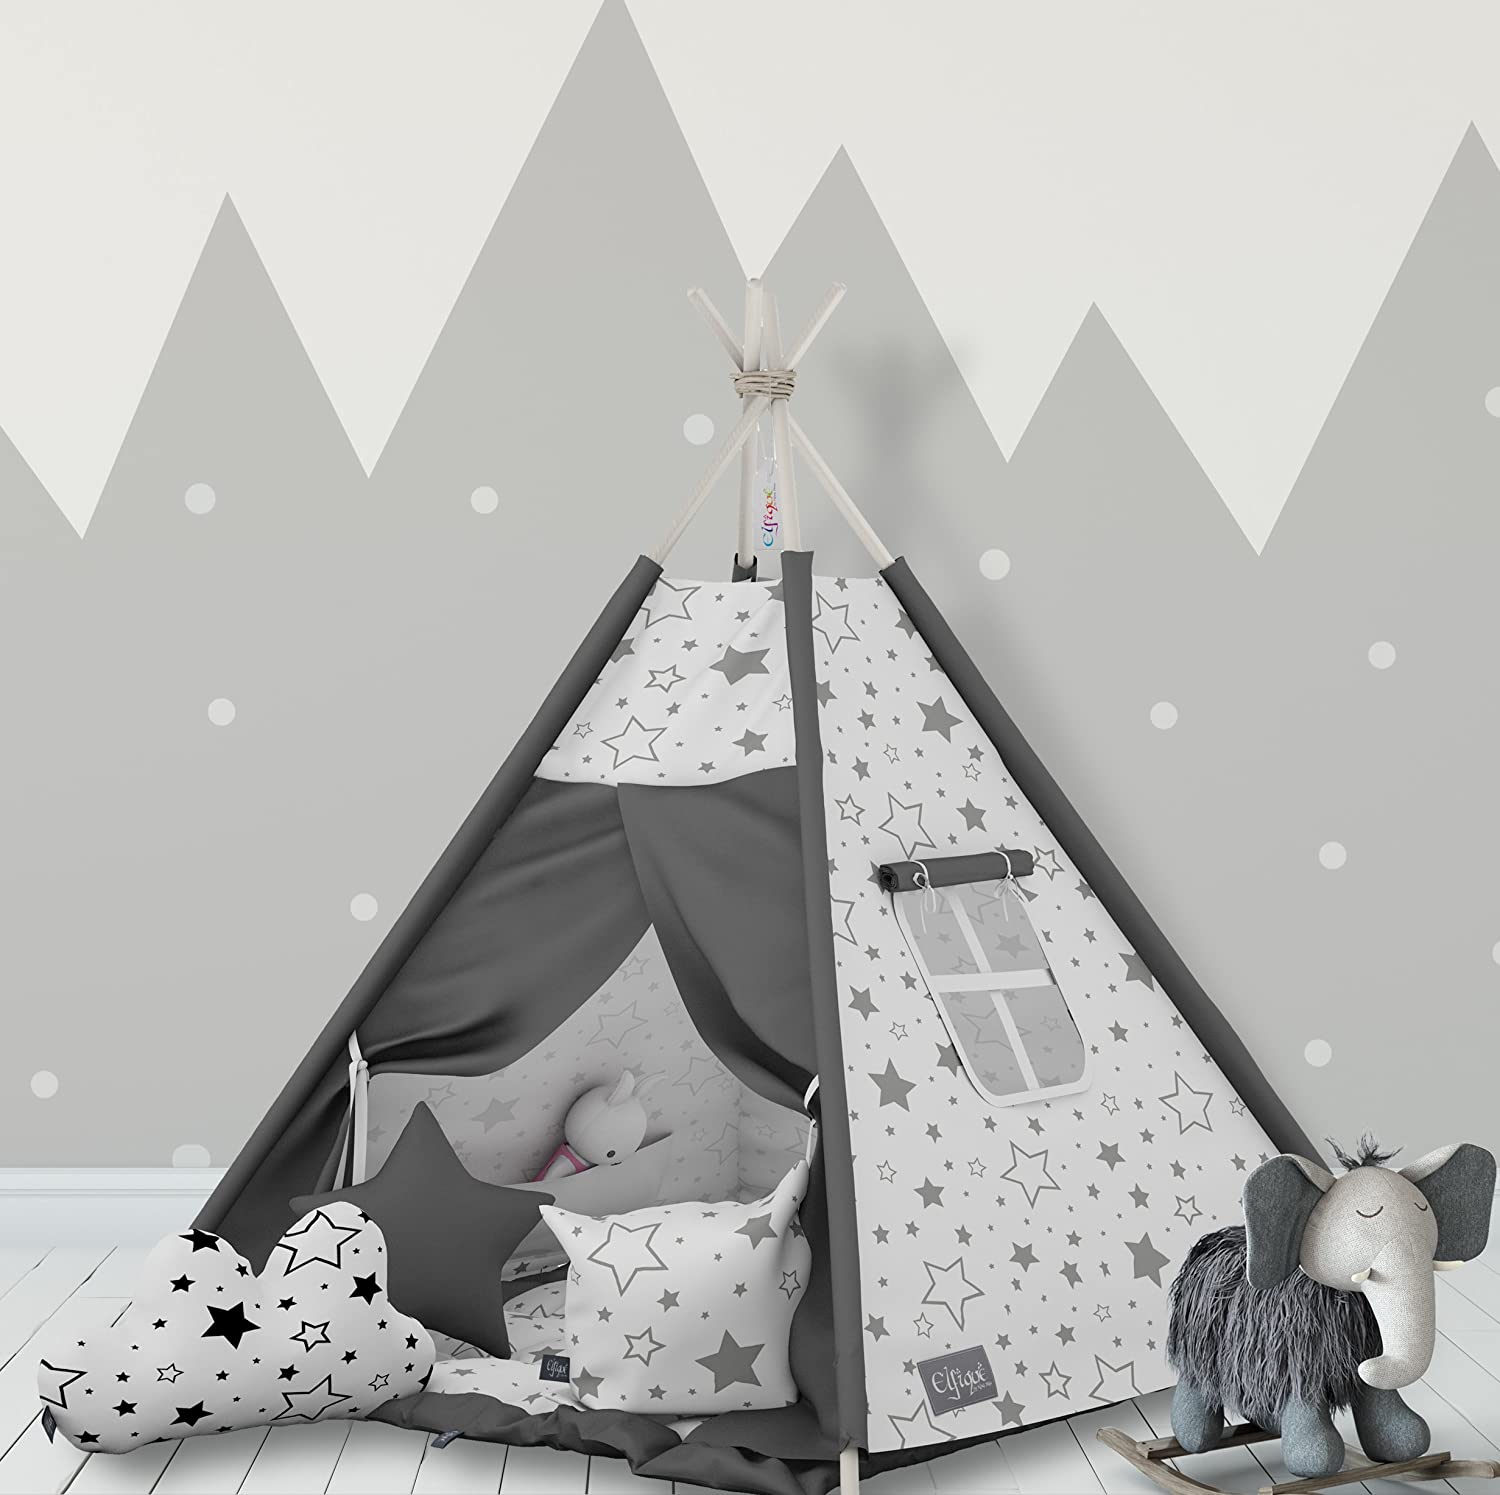 Tipi Teepee" Elfique Double Padded Cover And Three Pillow